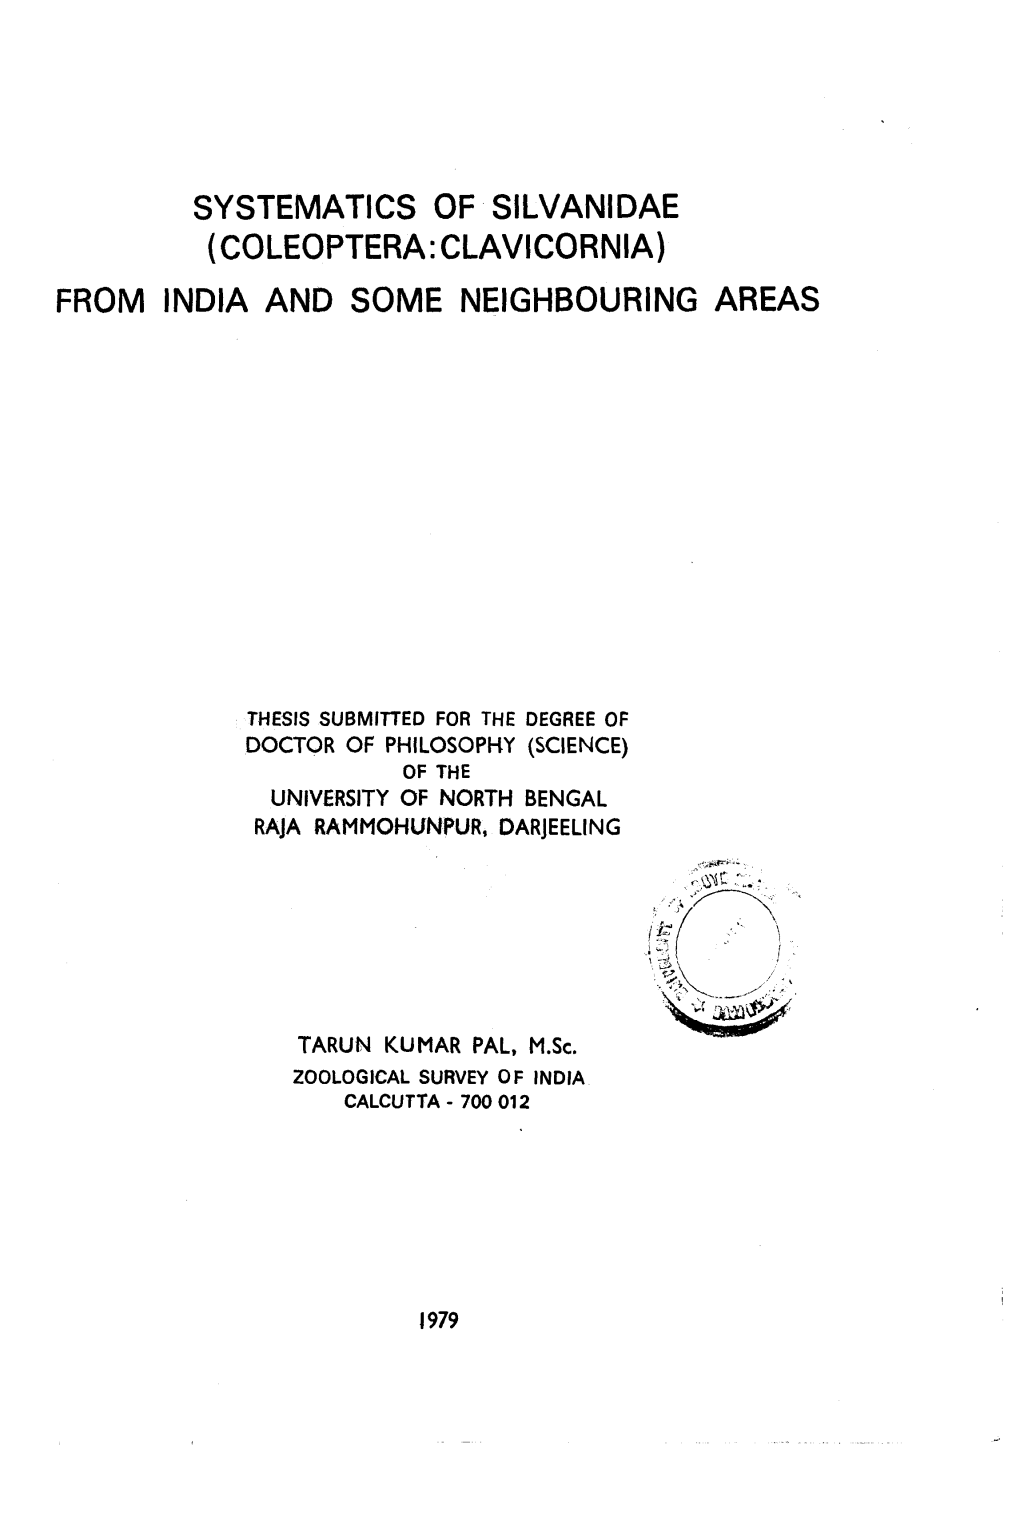 Systematics of Silvanidae (Coleoptera.Clavicornia) from India and Some Neighbouring Areas